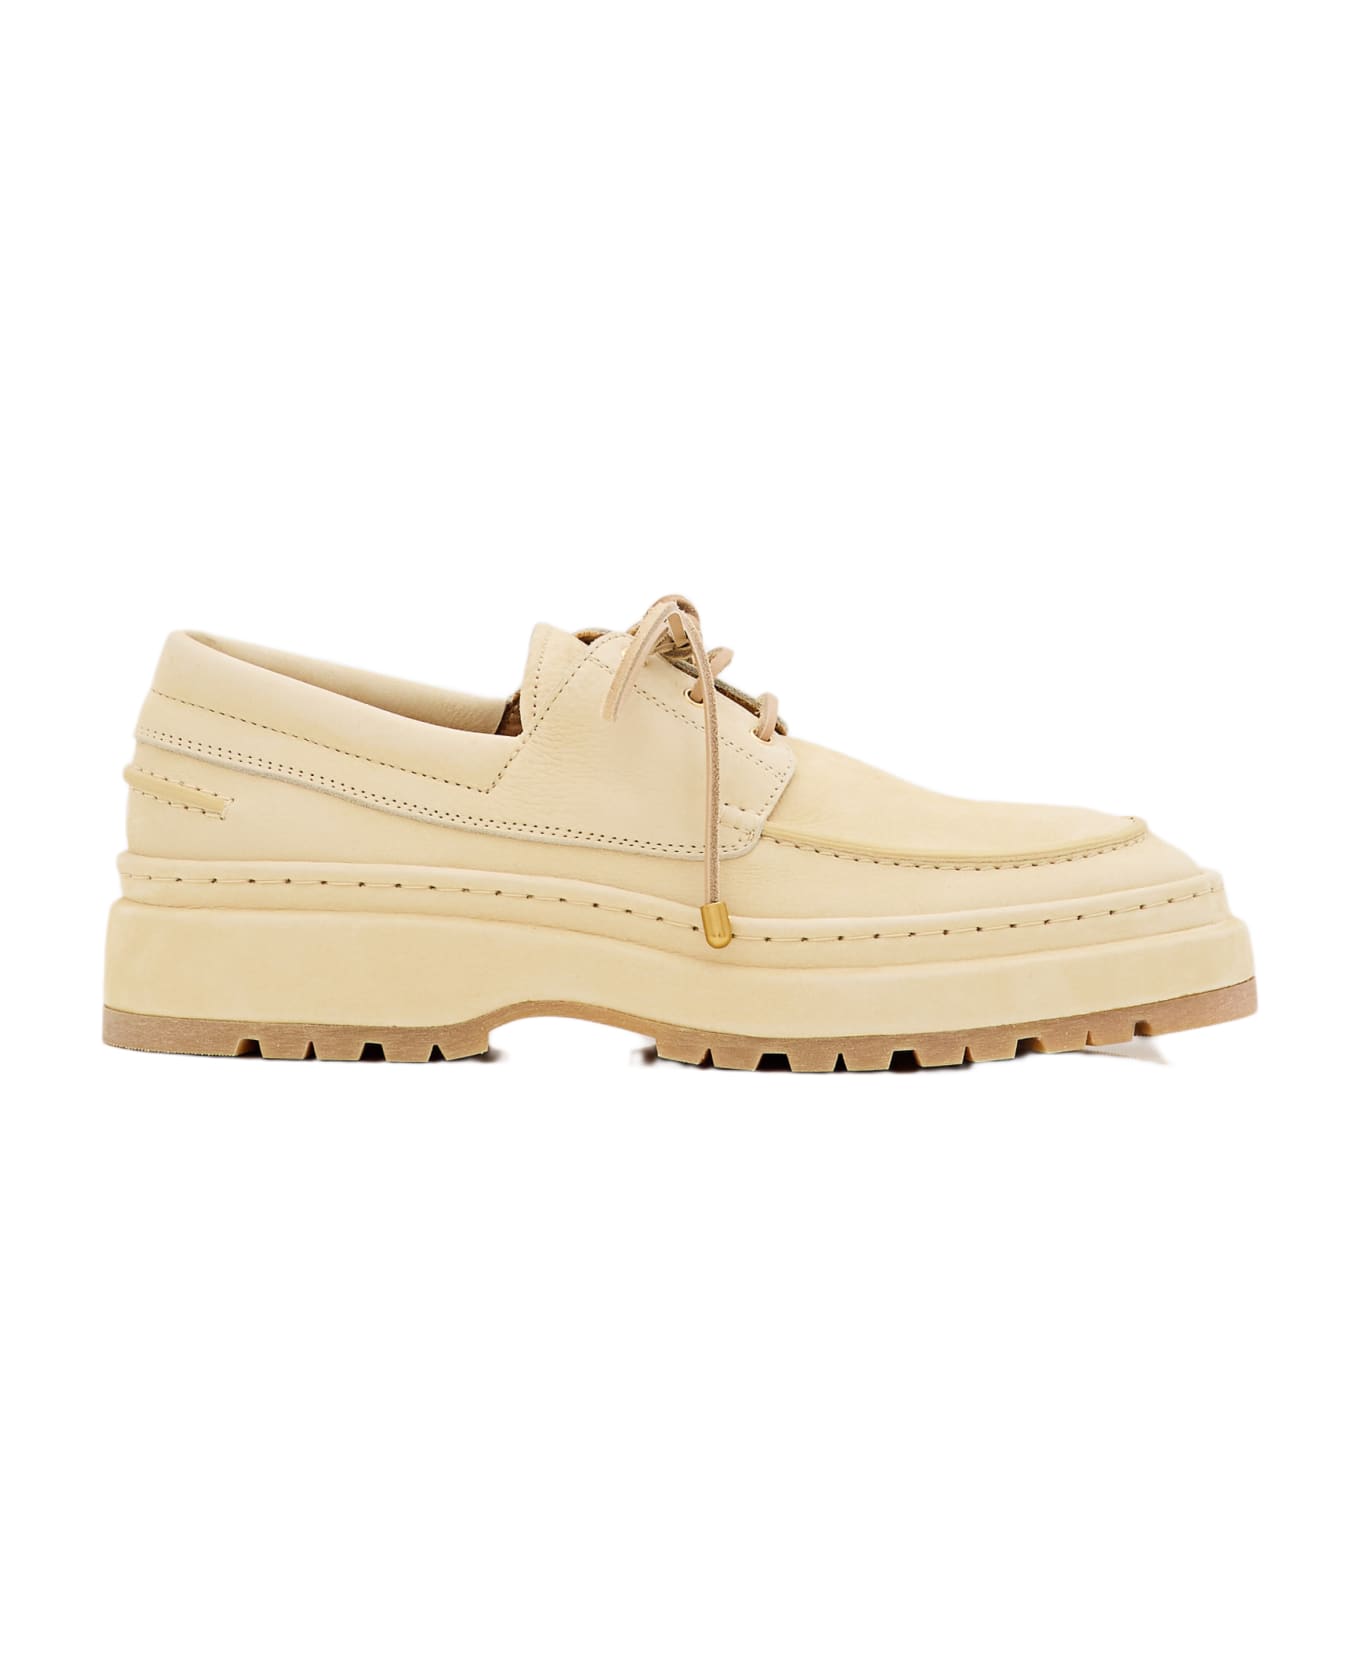 Jacquemus Double Boat Shoes - Beige ローファー＆デッキシューズ